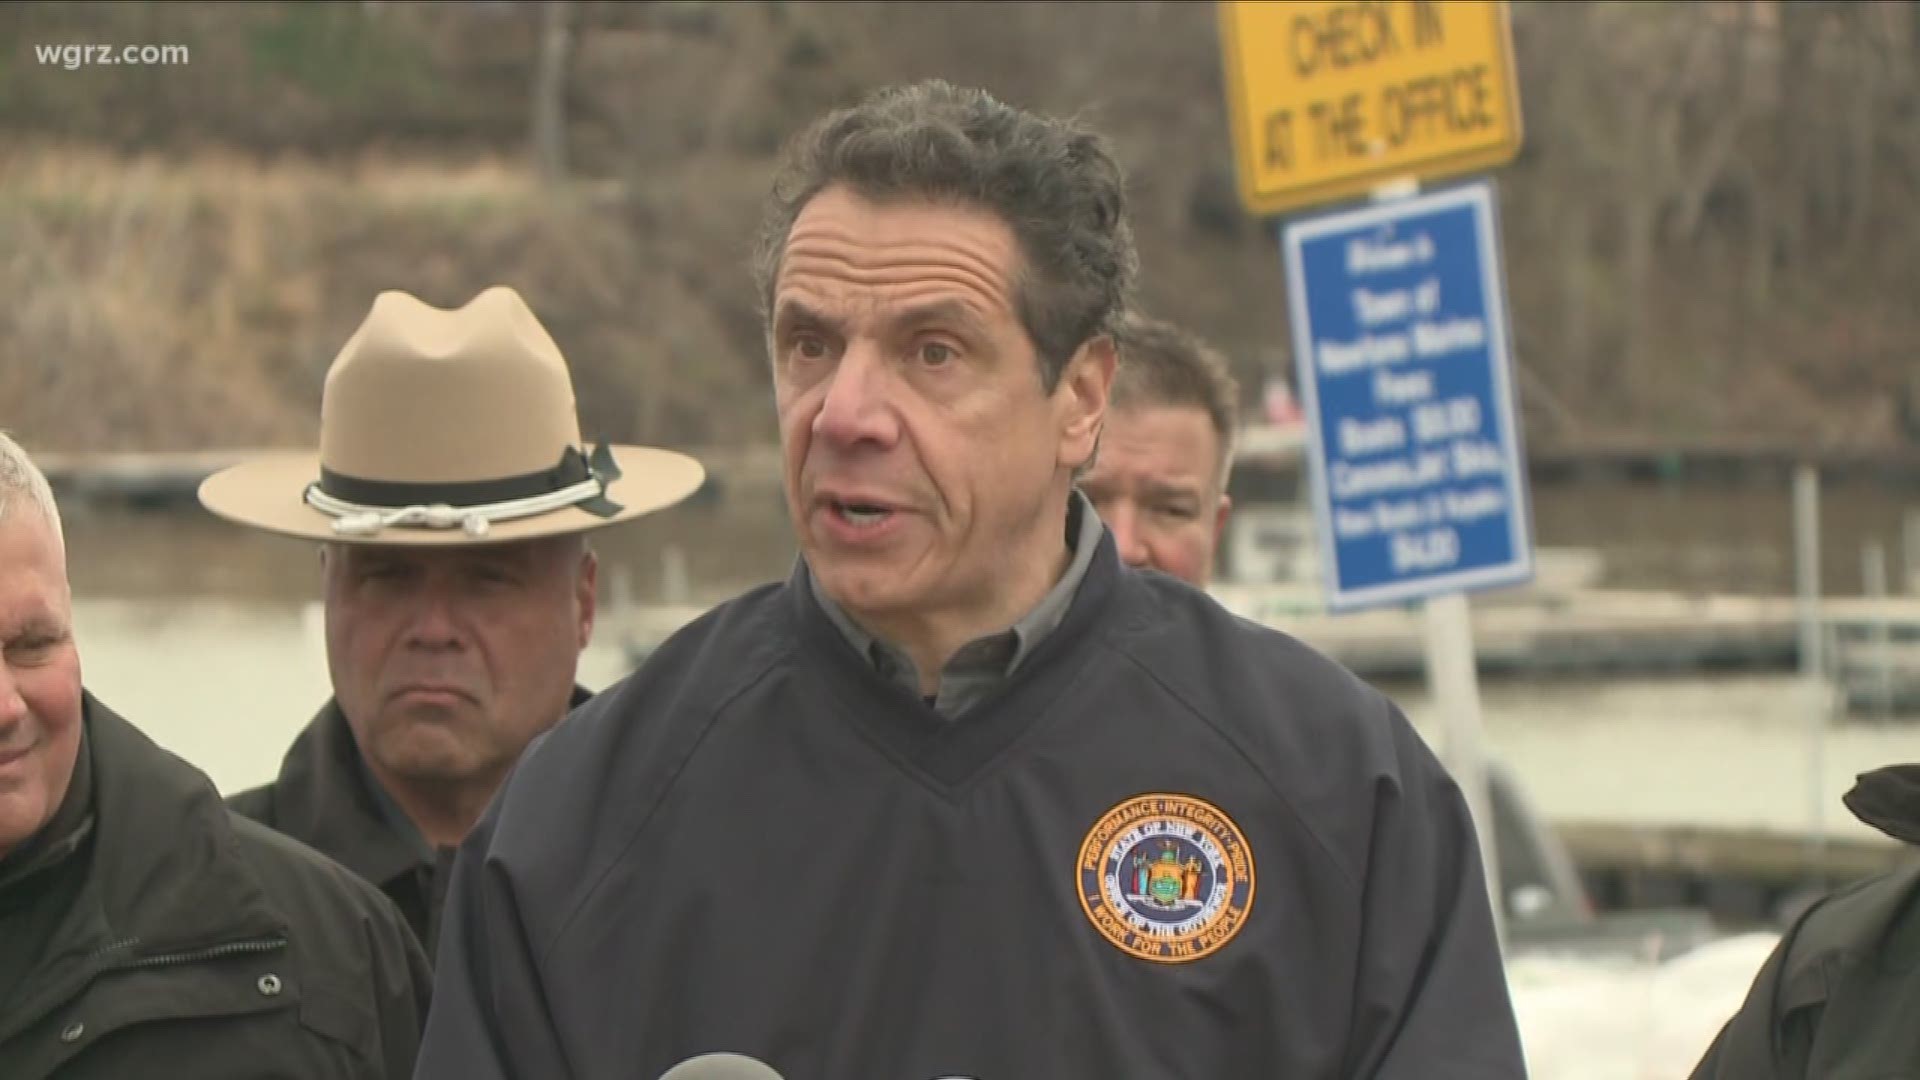 Cuomo promises the state will assist however it can.